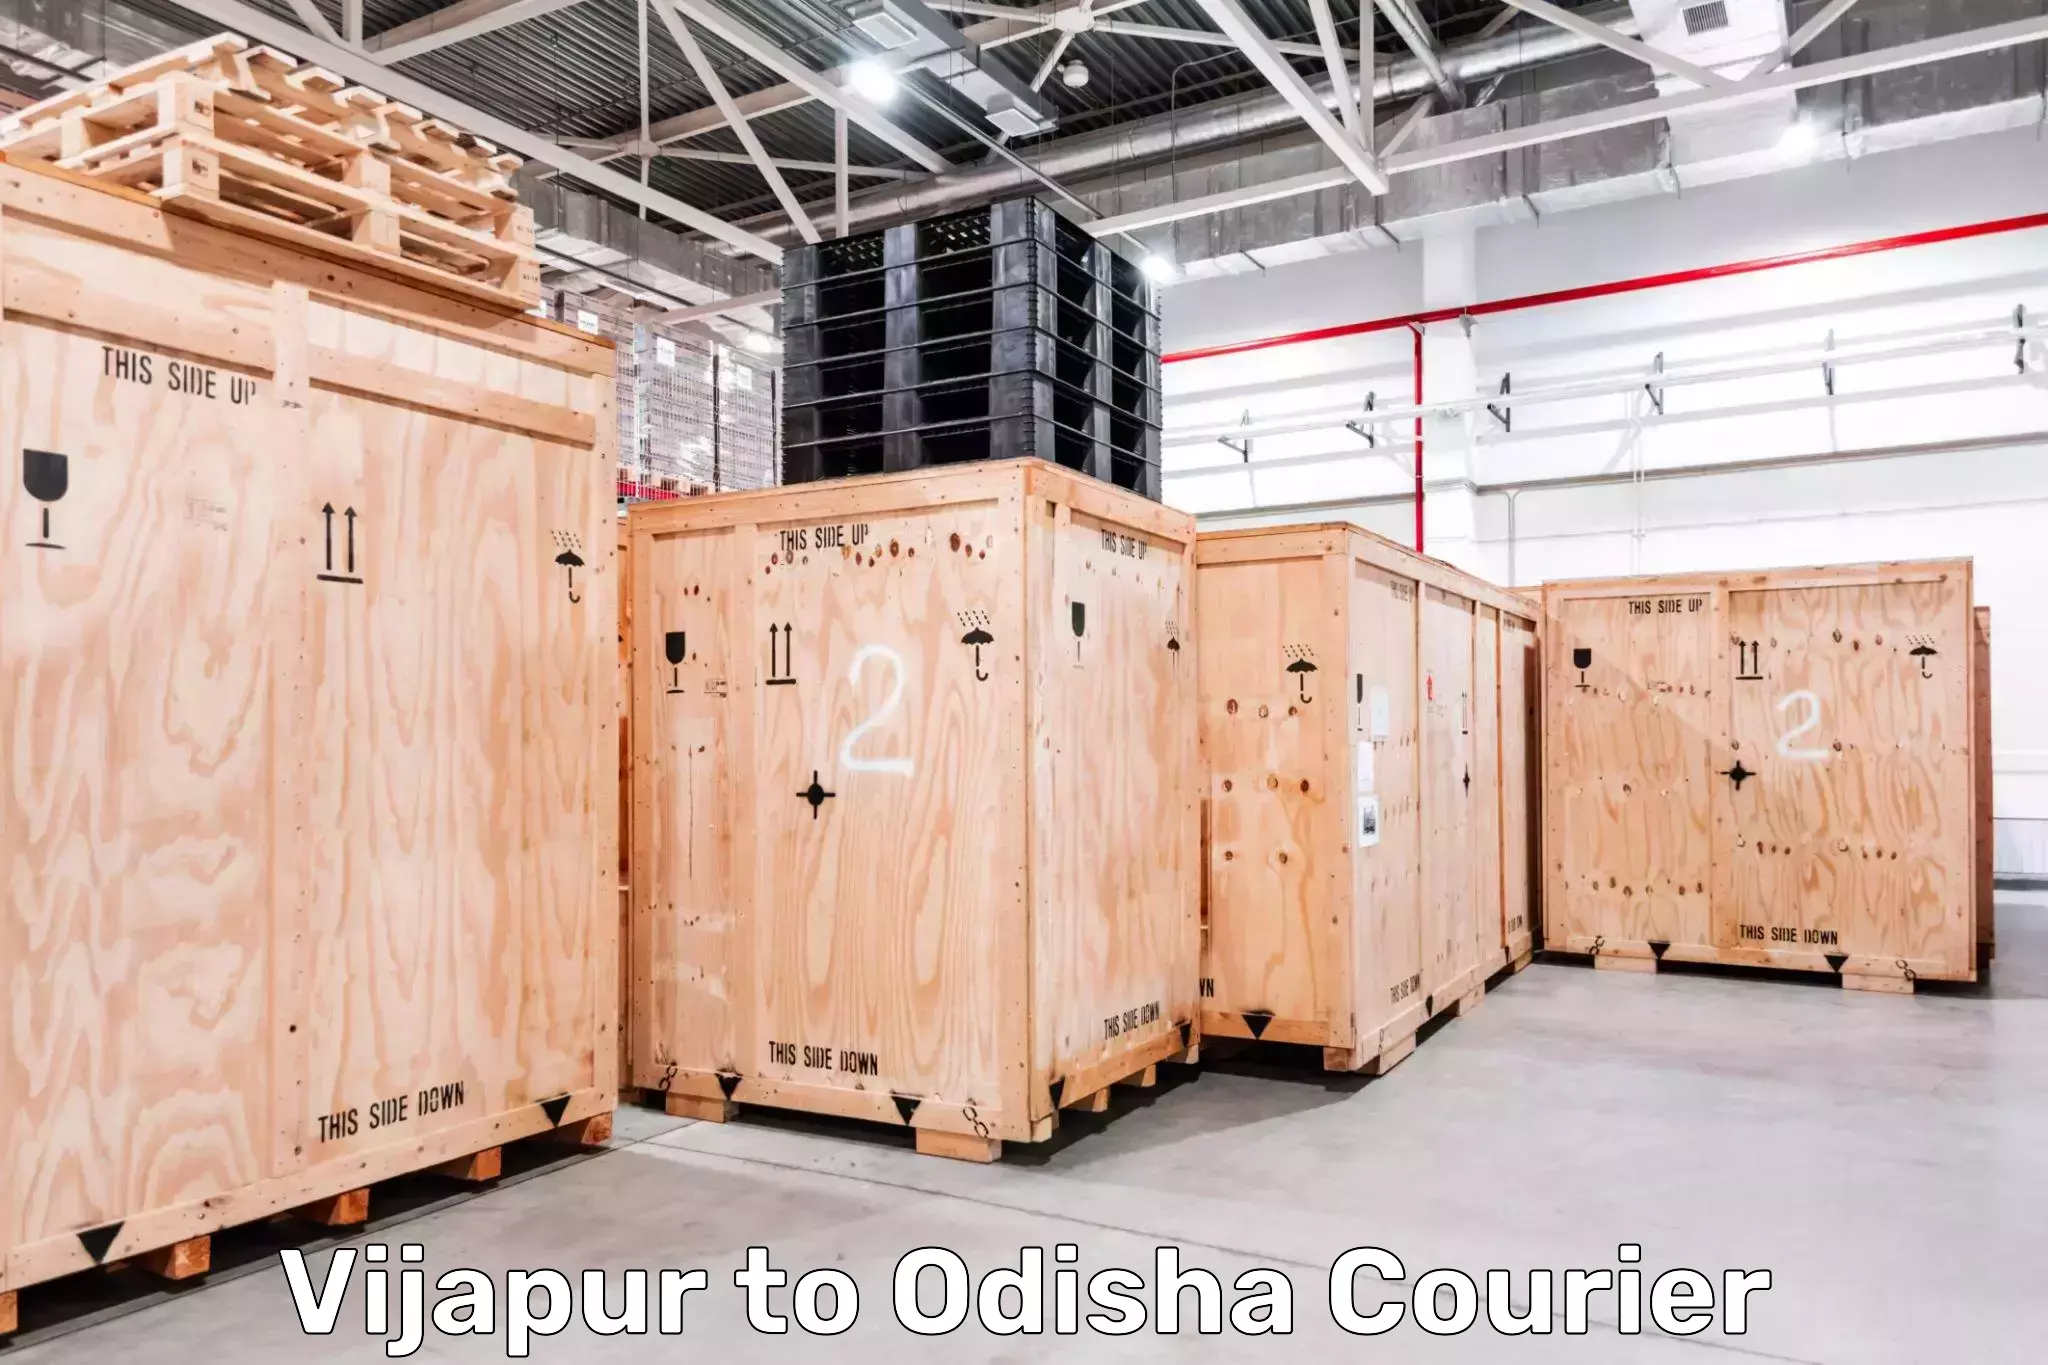 Flexible delivery scheduling Vijapur to Odisha